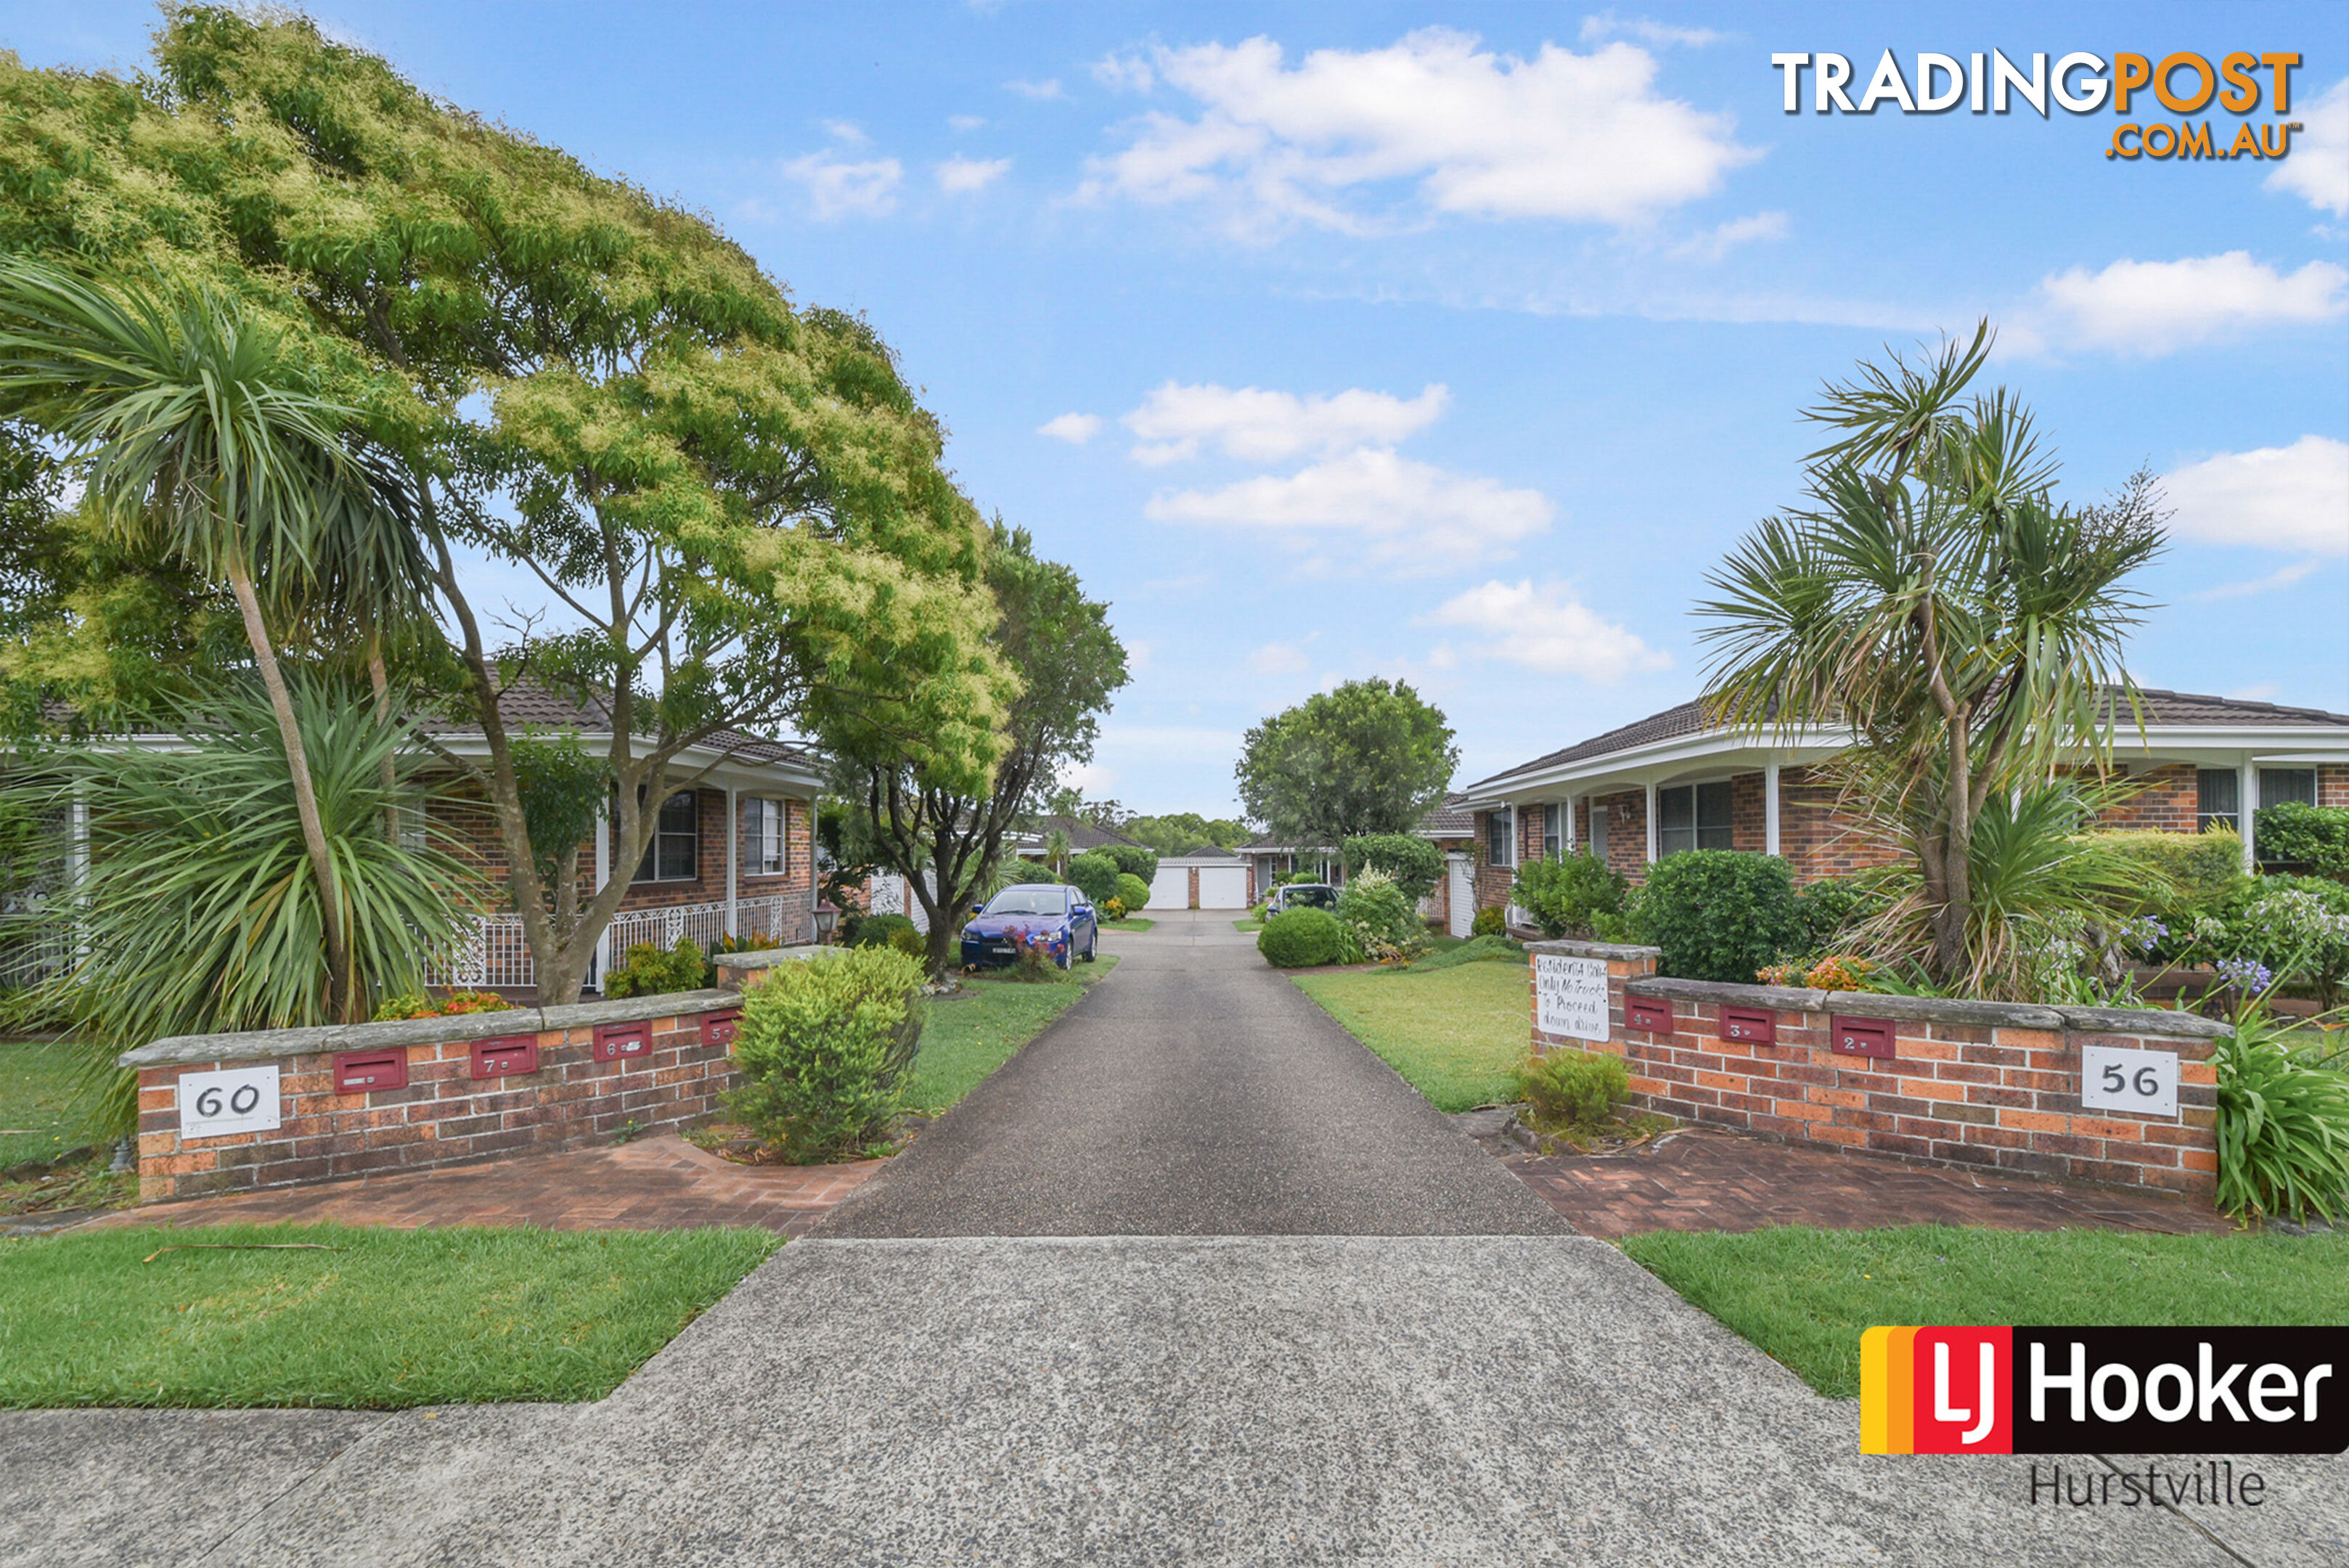 4/56-60 St Georges Road BEXLEY NSW 2207